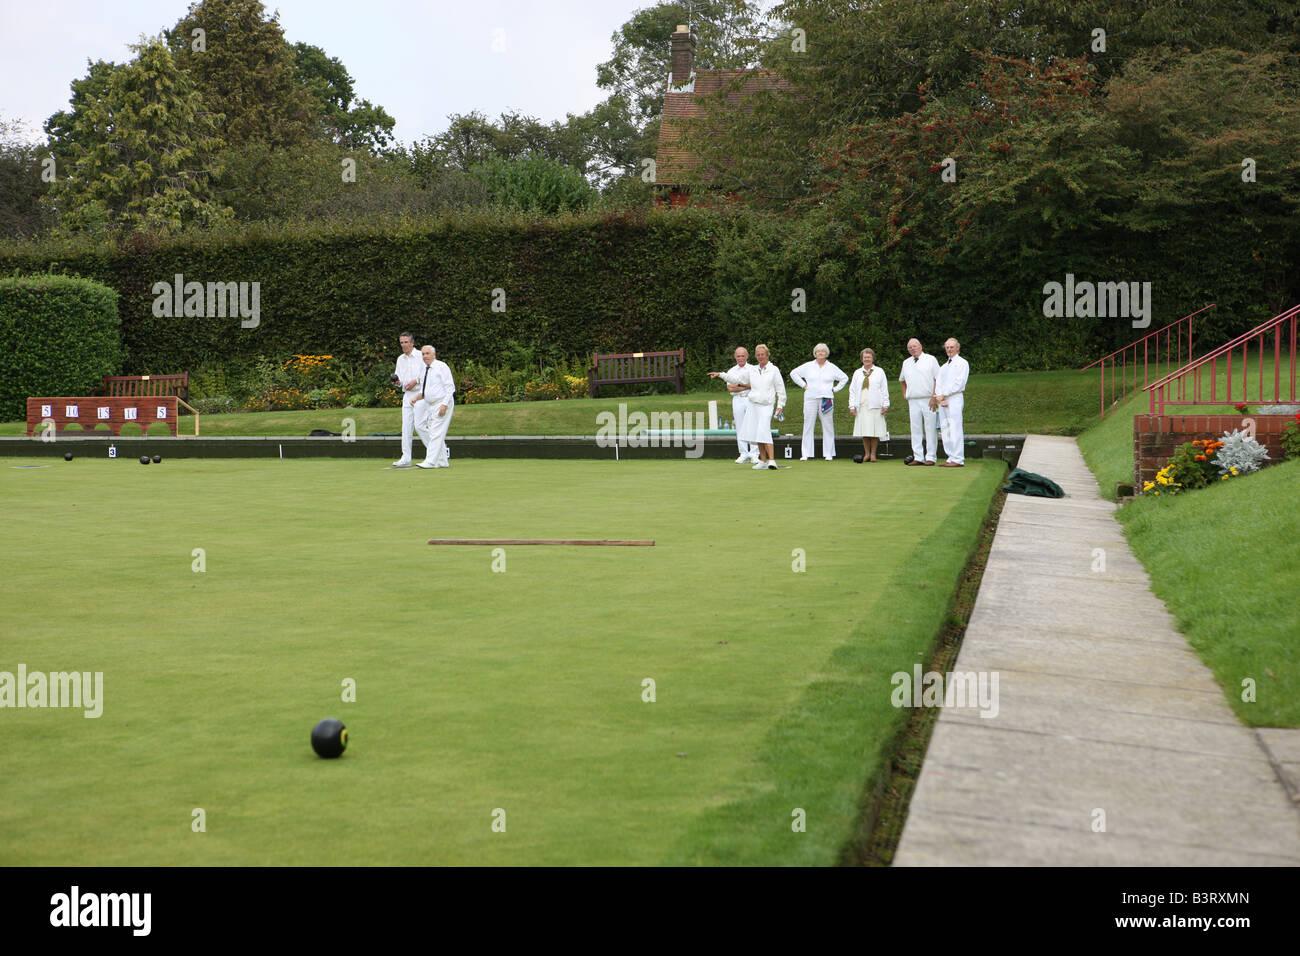 Charity bowls competition in England on a pleasant Sunday afternoon. Stock Photo